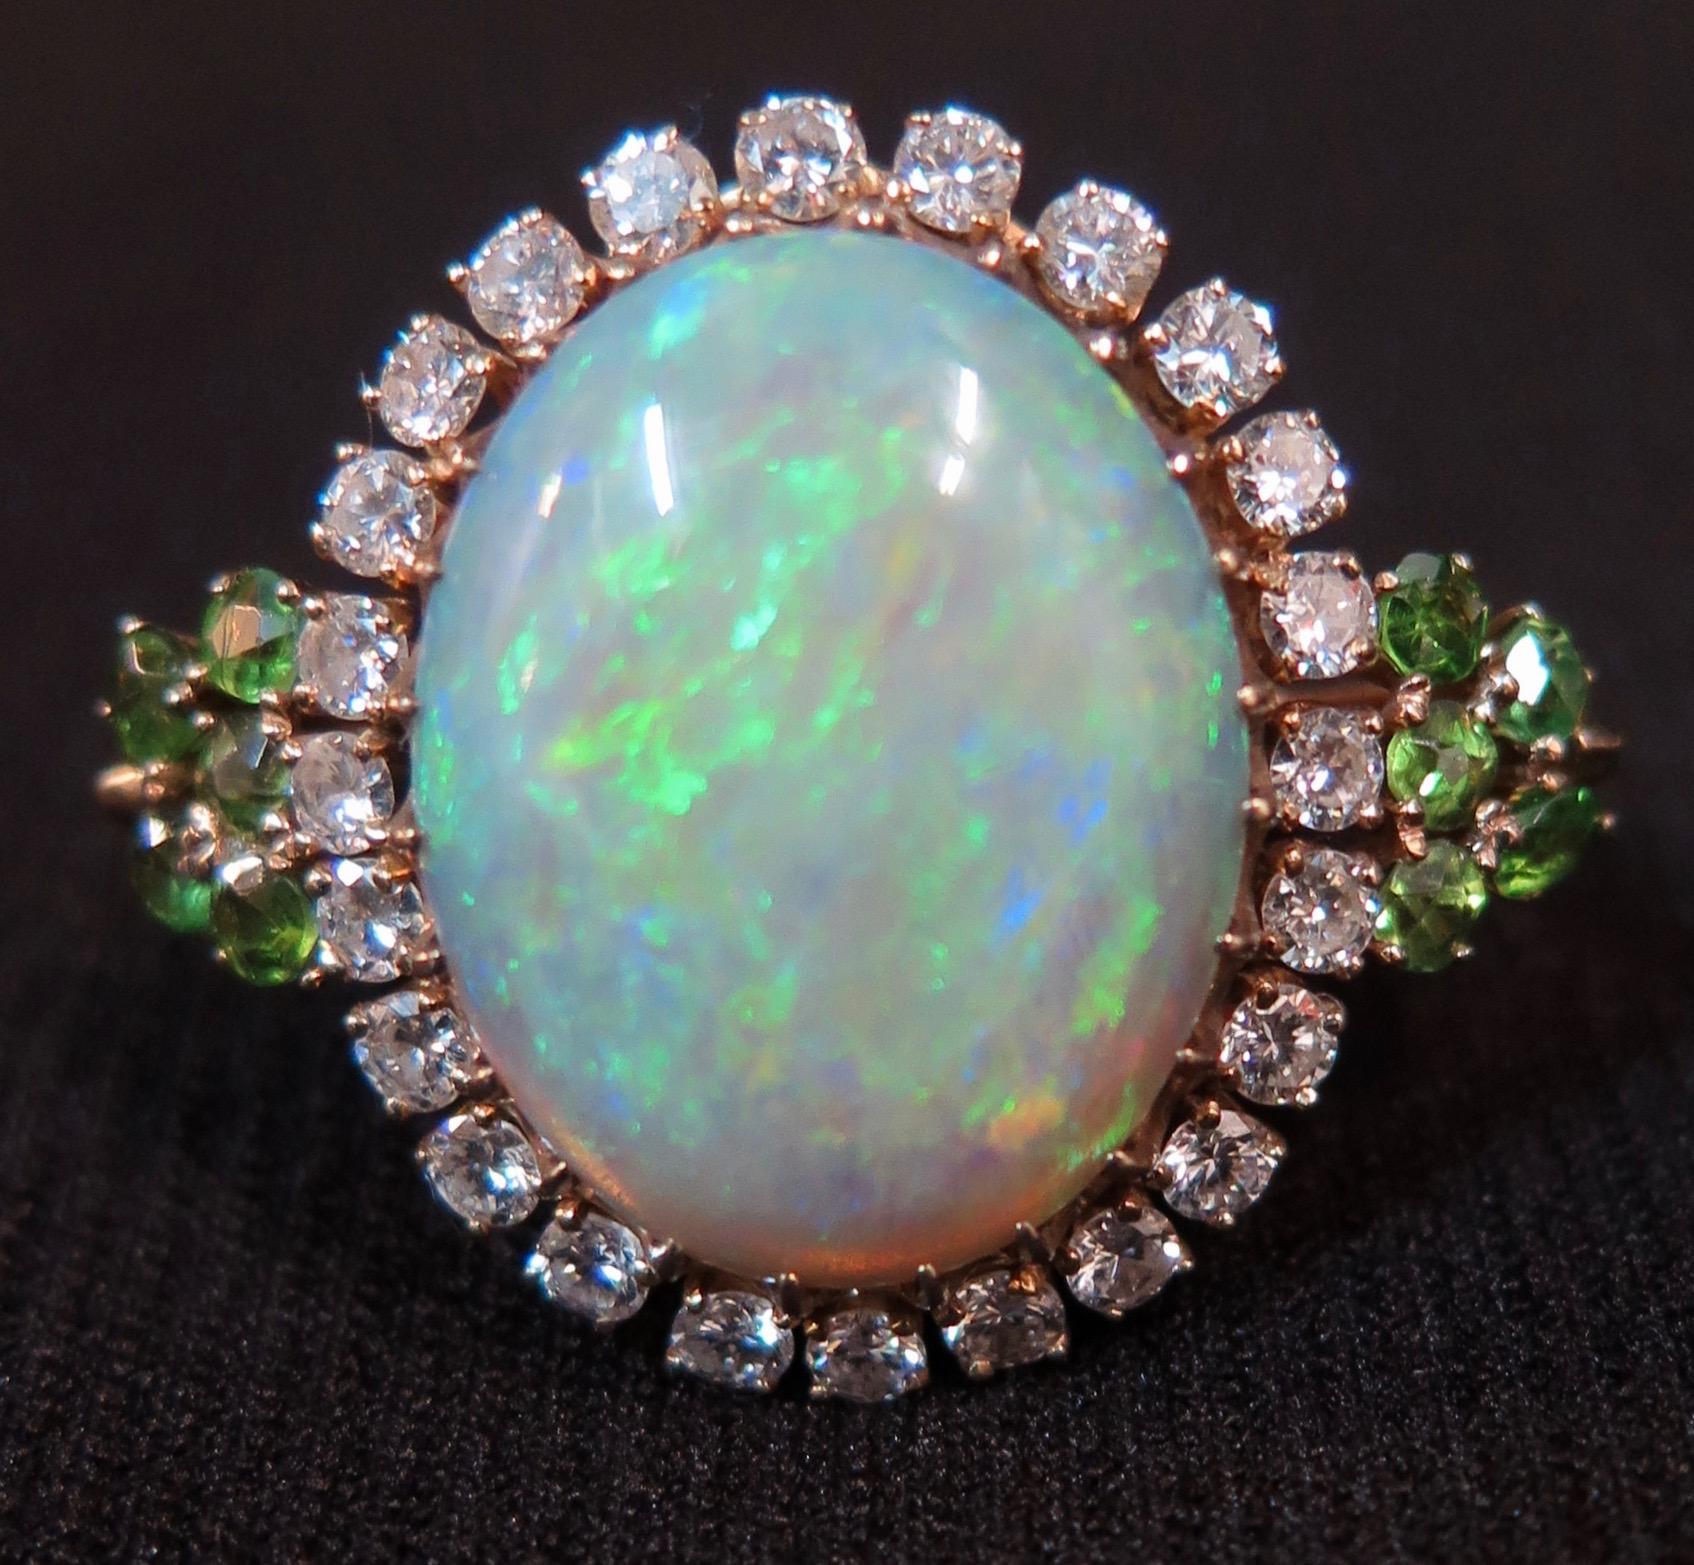 This vintage mid-20th century ladies gem stone ring is designed in 14-karat gold with a magnificent opal, diamonds & peridots. The 8 carat oval cabochon blue/green opal is without flaws and has vibrant color with lustrous accents. This wonderful gem